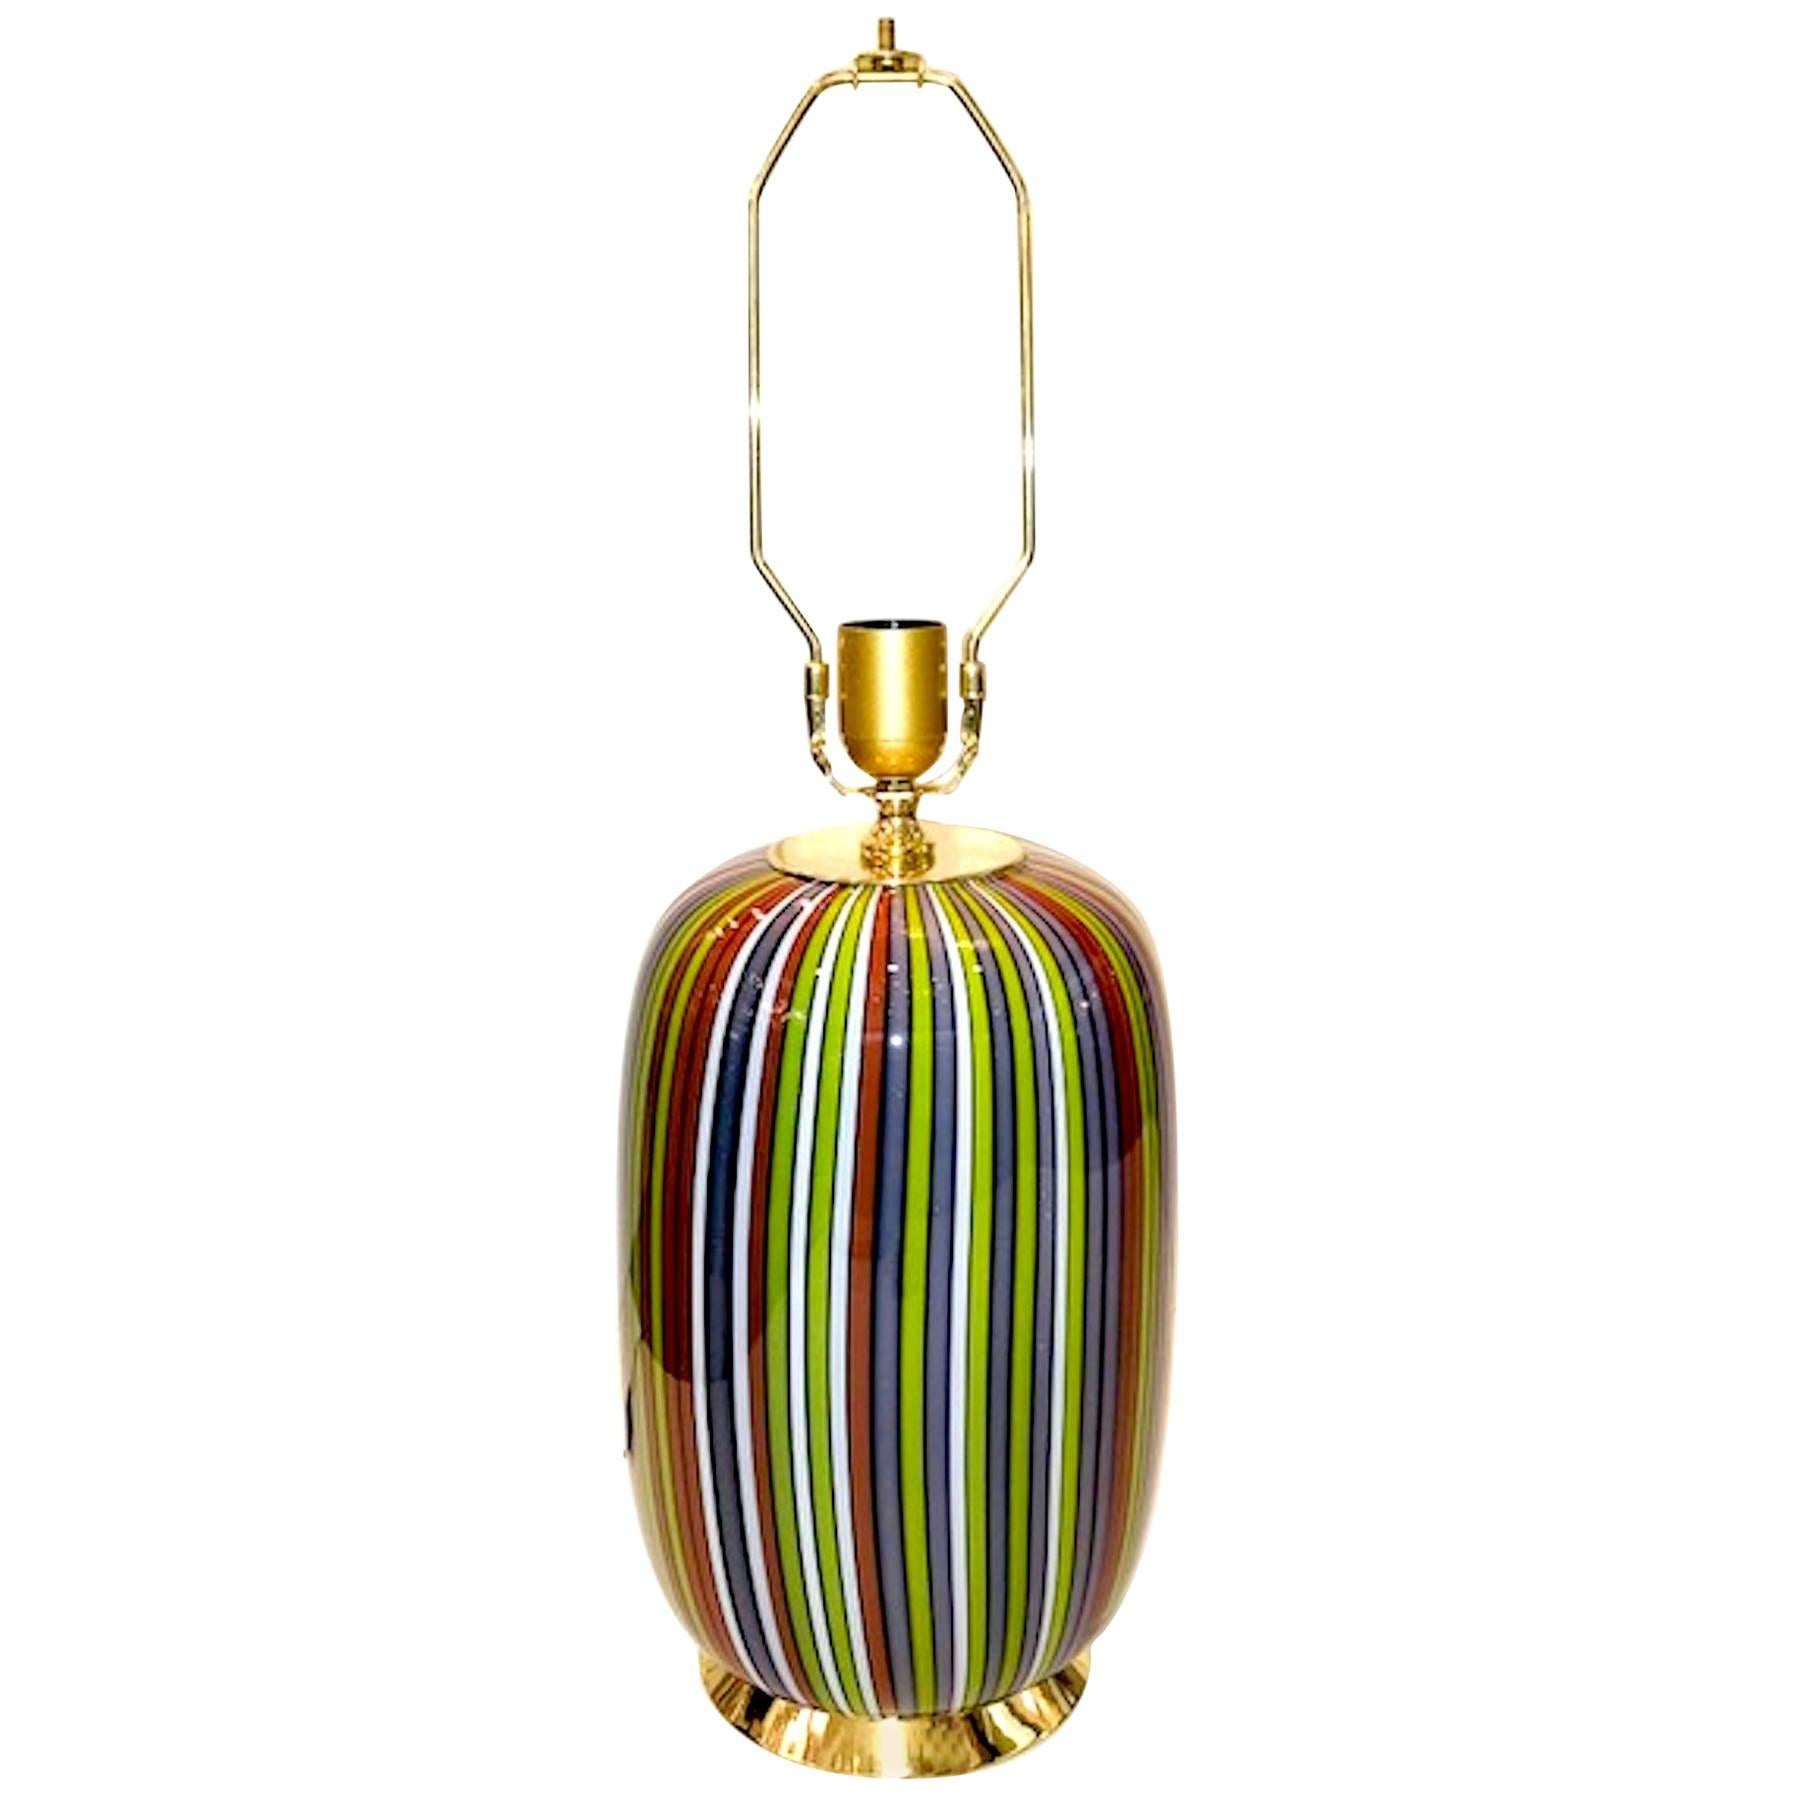 Beautiful 1980s hand blown table lamp by Italian glass house Ve Art. Glass is blown with a design in stripes of blue-grey, white, black, green and burgundy-brown stripes.  Brass mounts polished and lacquered. Rewired. Shade for display and not